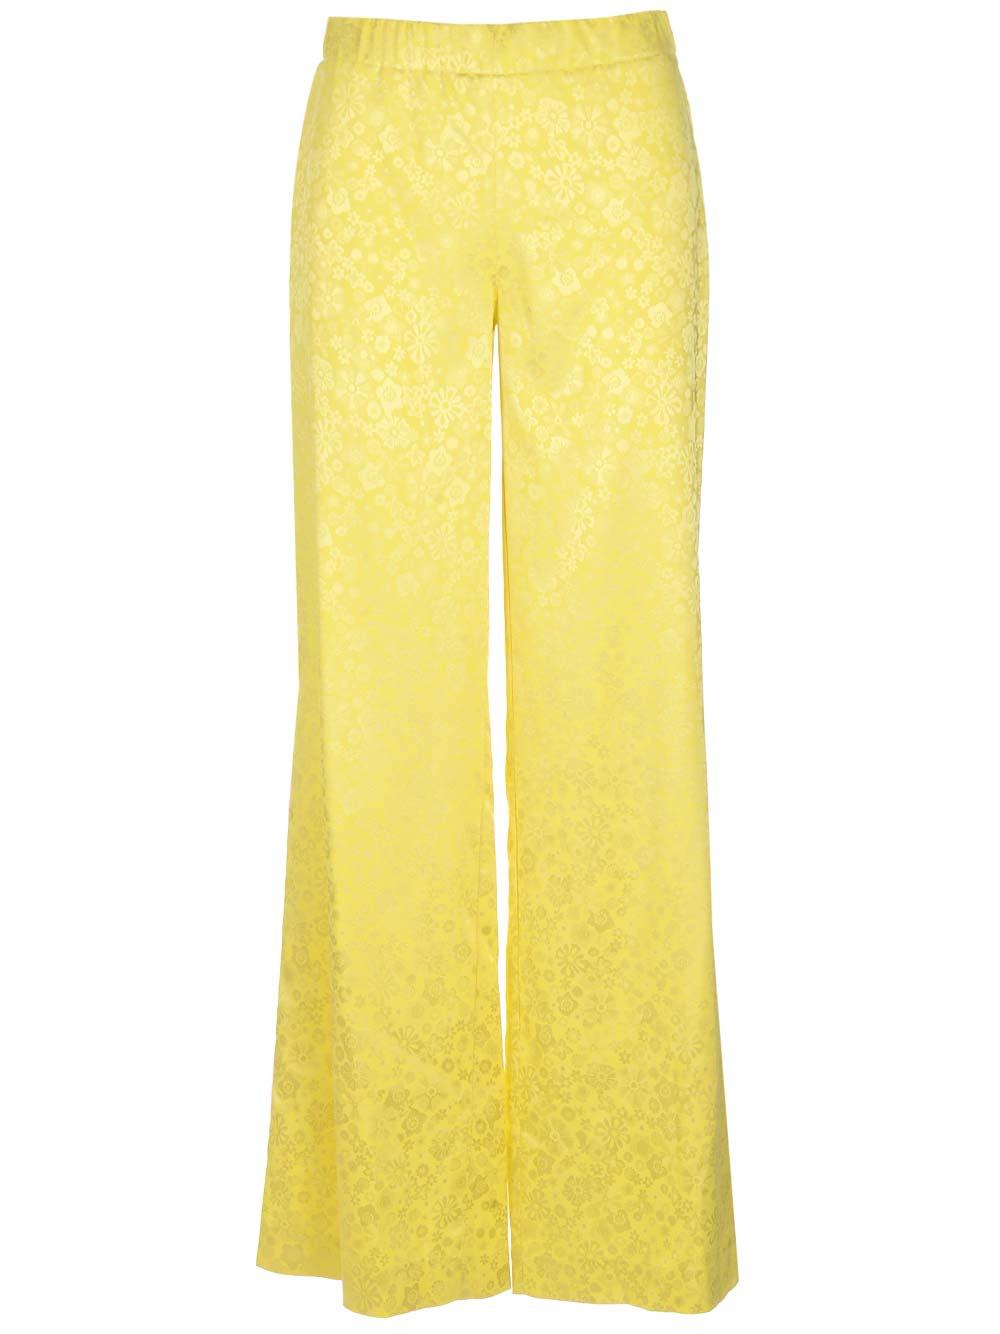 P.A.R.O.S.H YELLOW JACQUARD TROUSERS